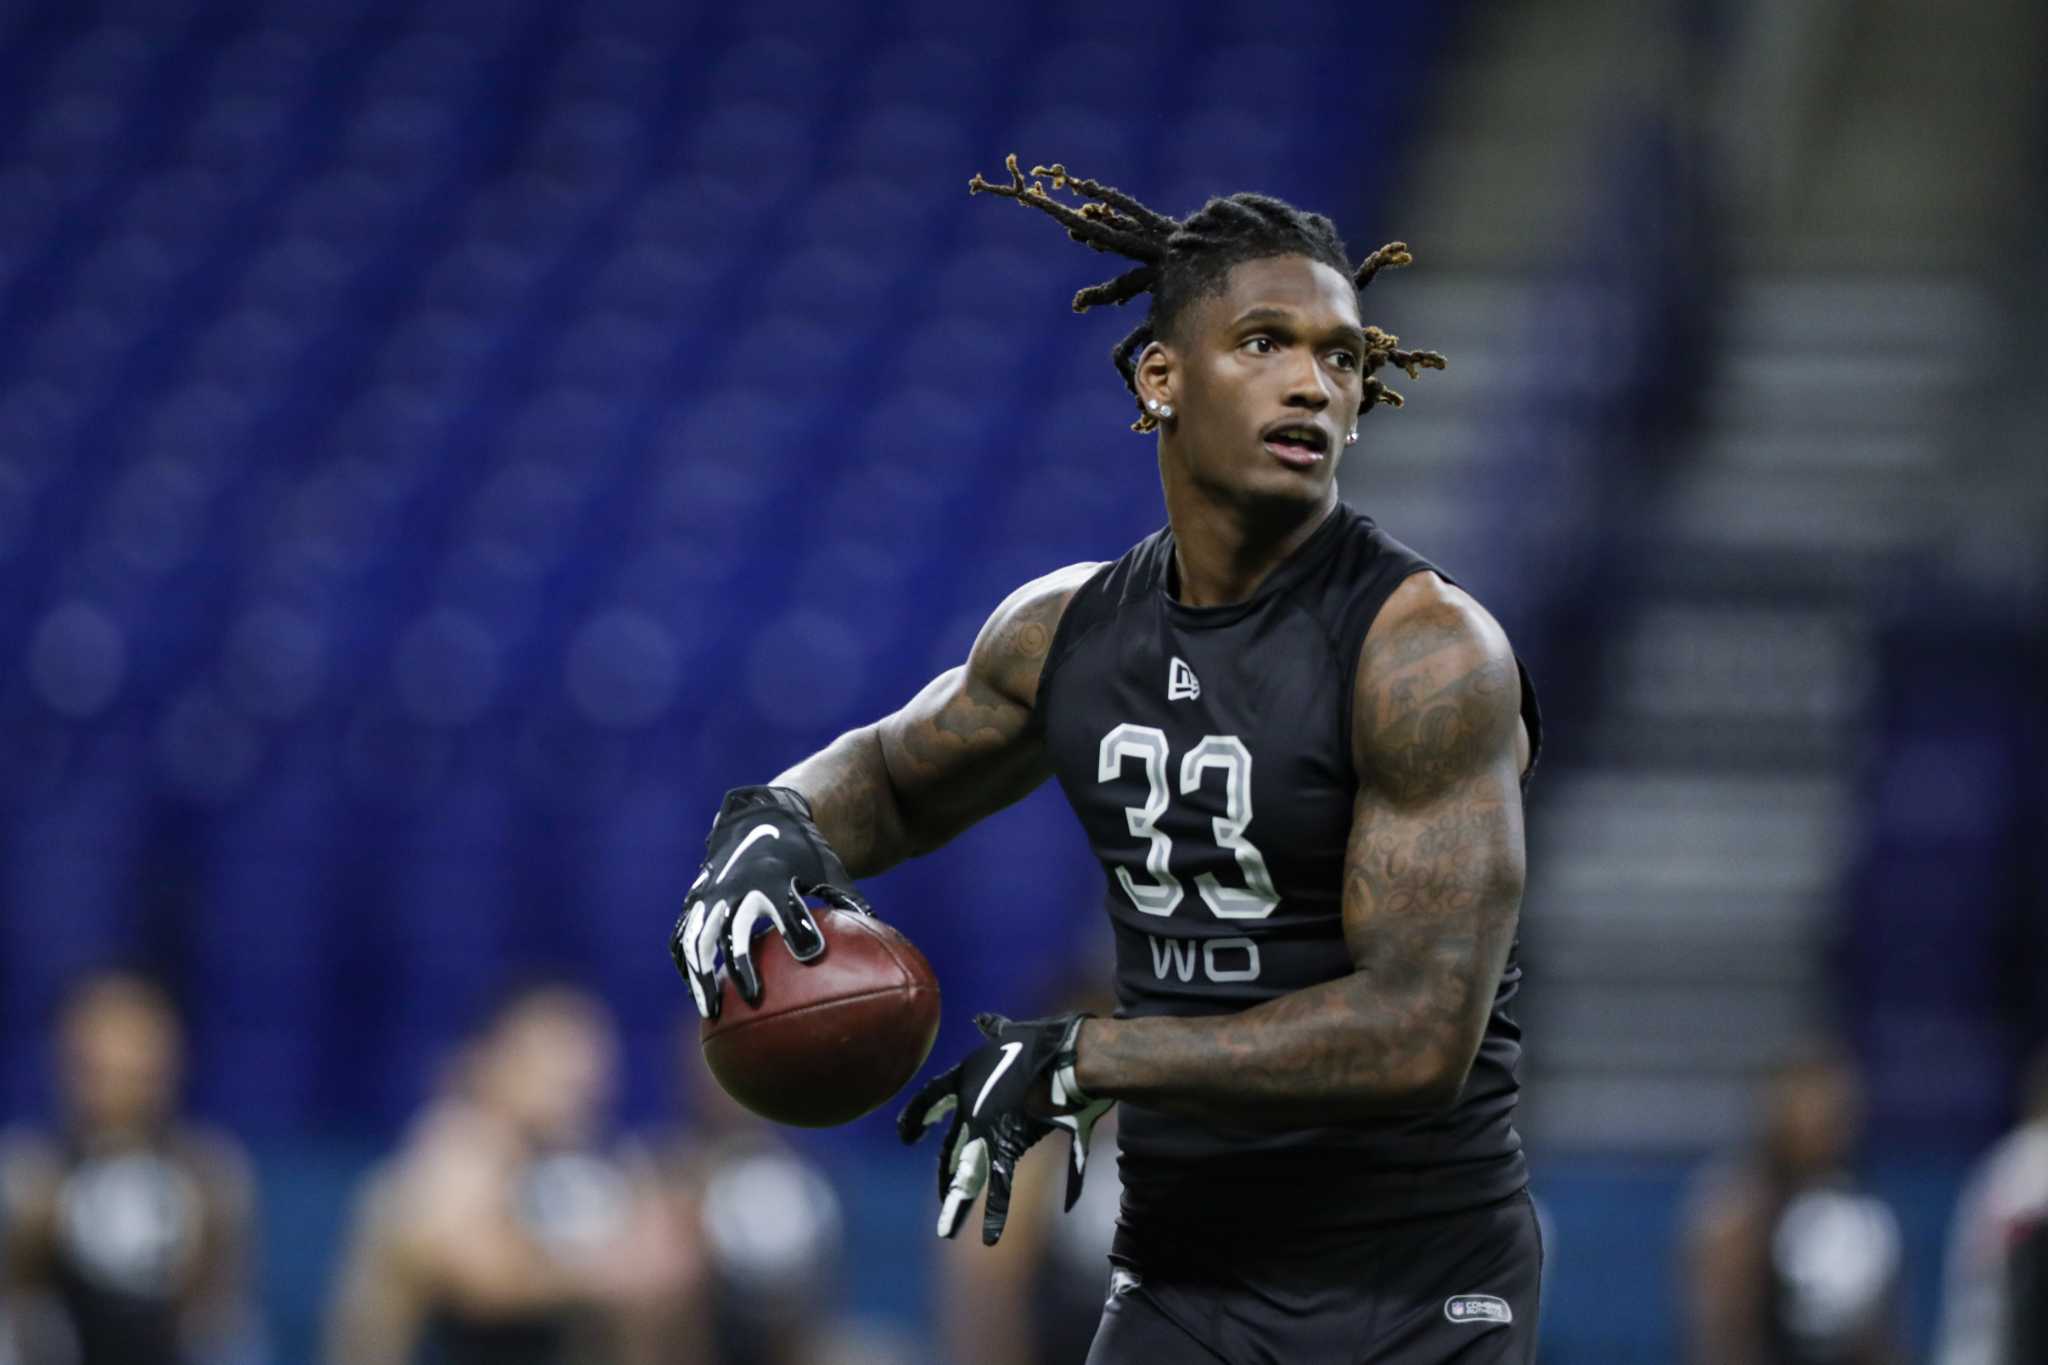 Oklahoma's CeeDee Lamb puts on a show at NFL combine.